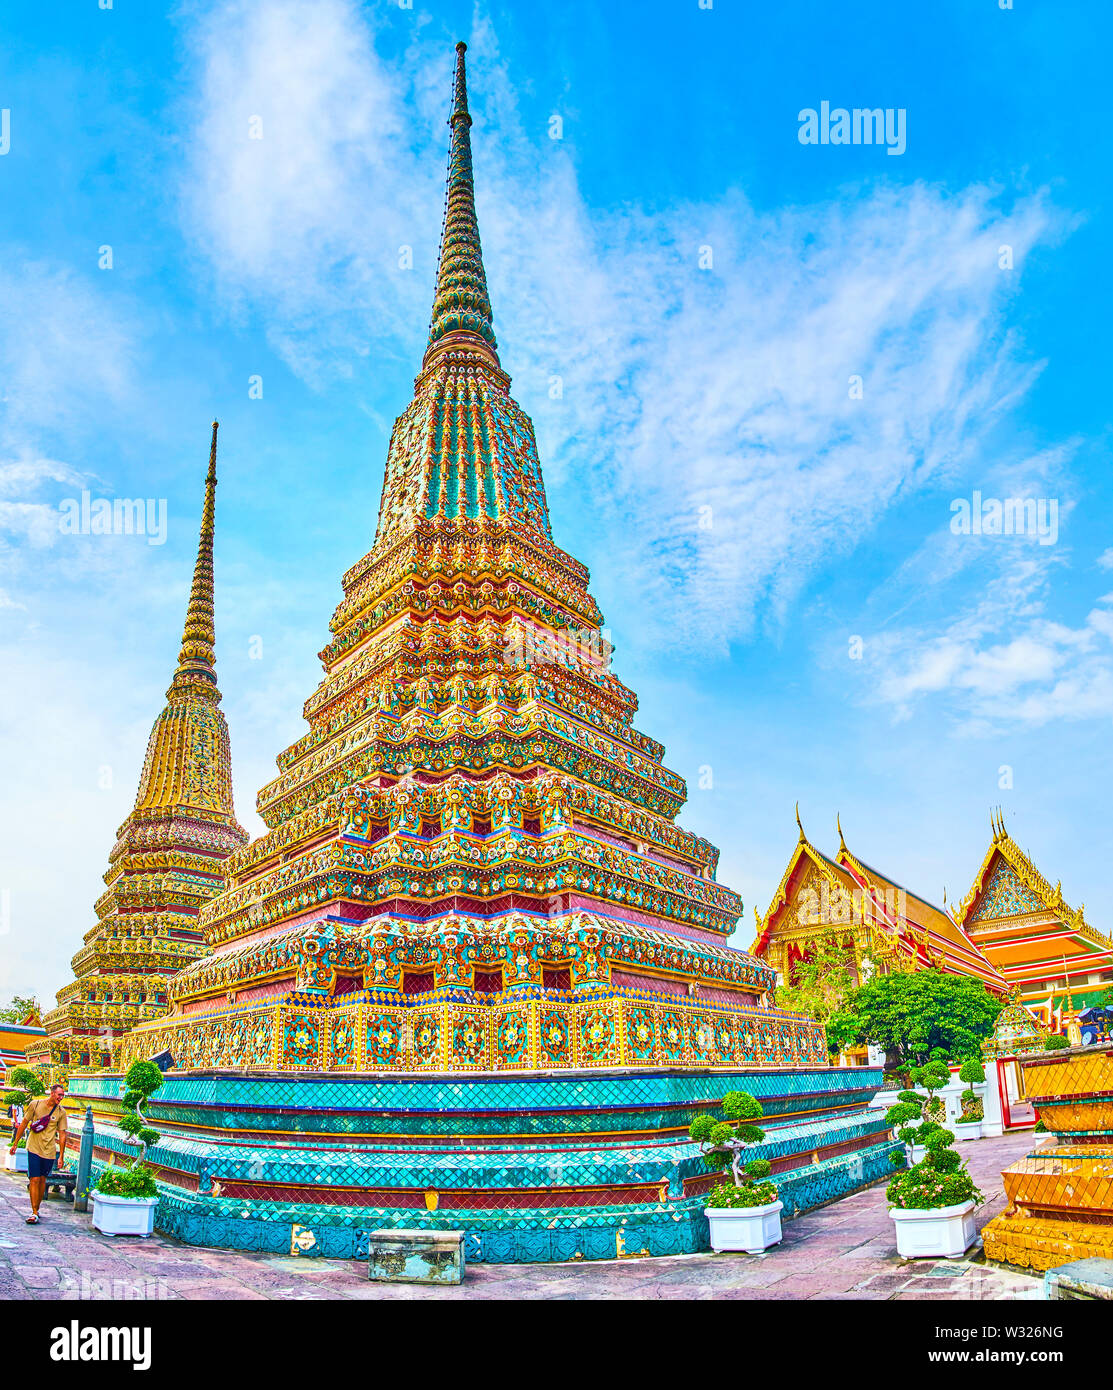 BANGKOK, THAILAND - APRIL 22, 2019: The beautiful stupas, covered with colorful glazed tiles of Phra Maha Chedi shrine are one of the most notable lan Stock Photo